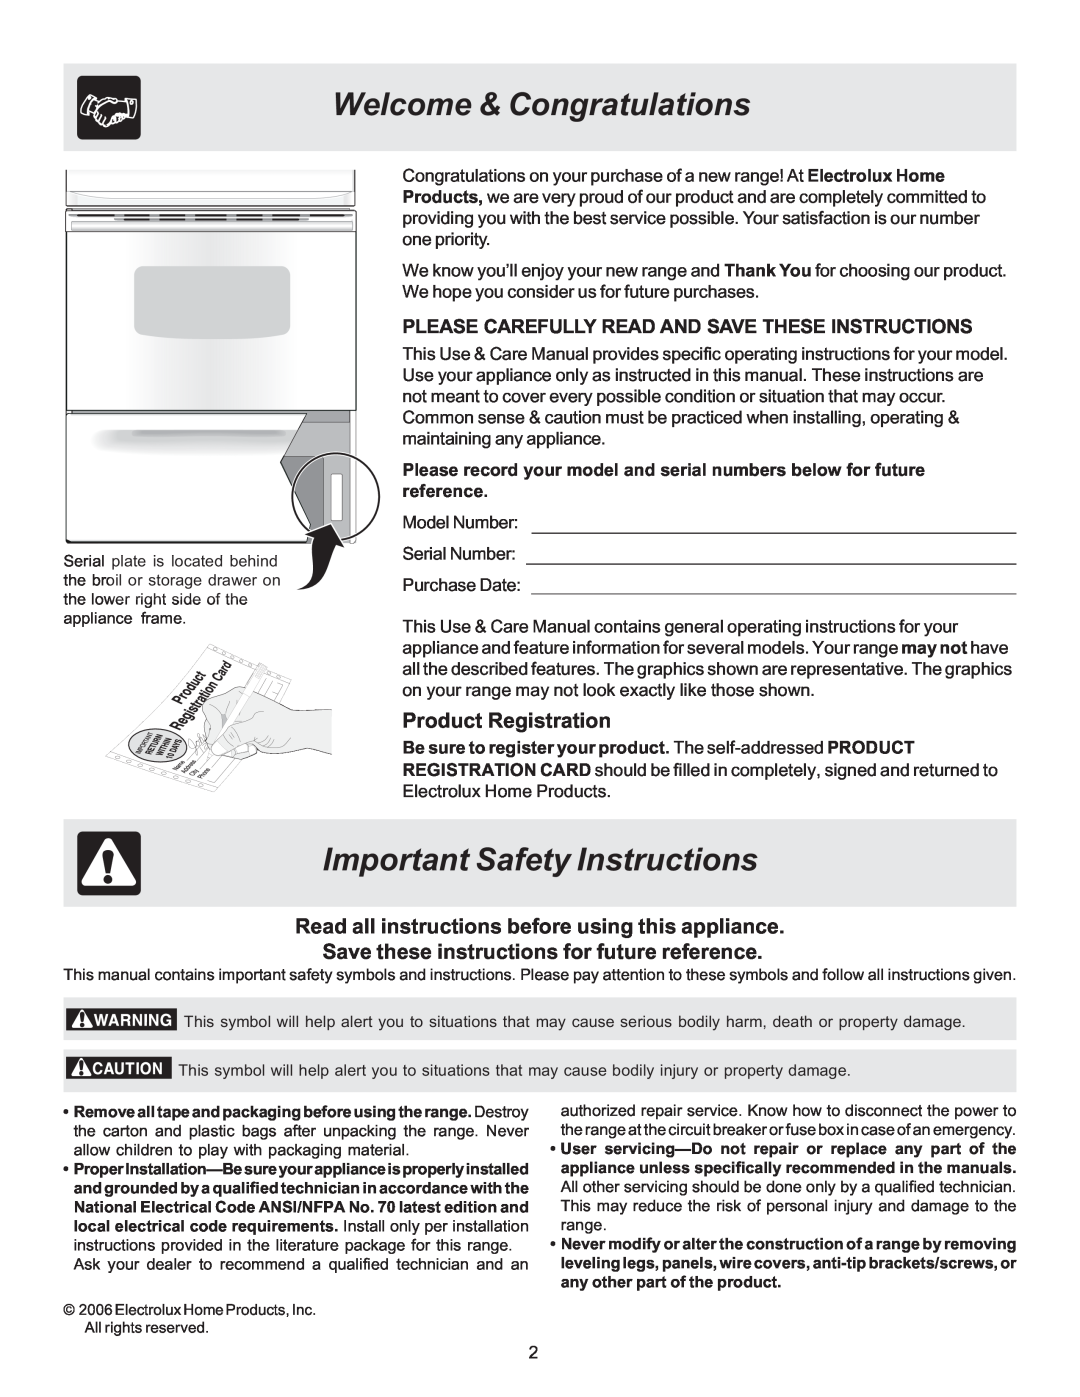 White-Westinghouse ES100 Welcome & Congratulations, Important Safety Instructions, Product Registration 